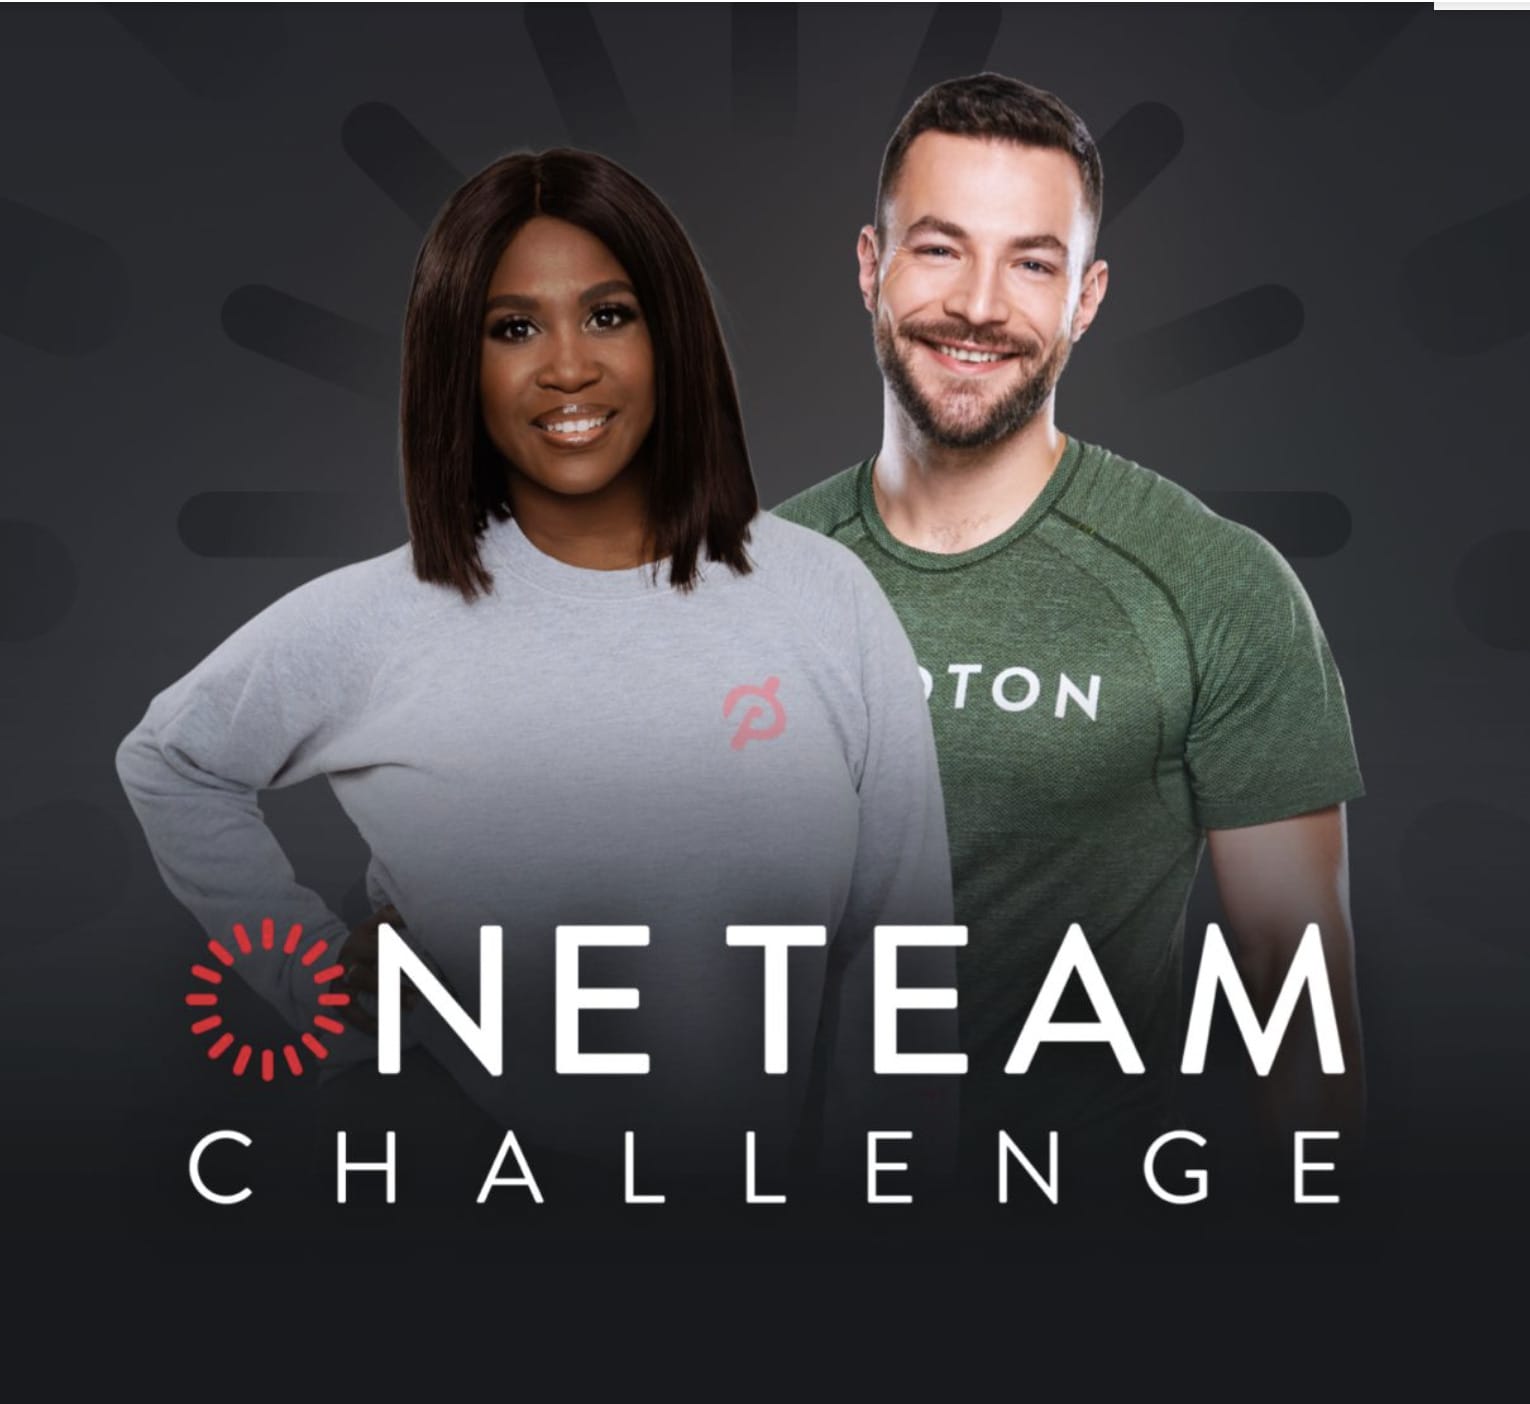 One Team Challenge promotional image